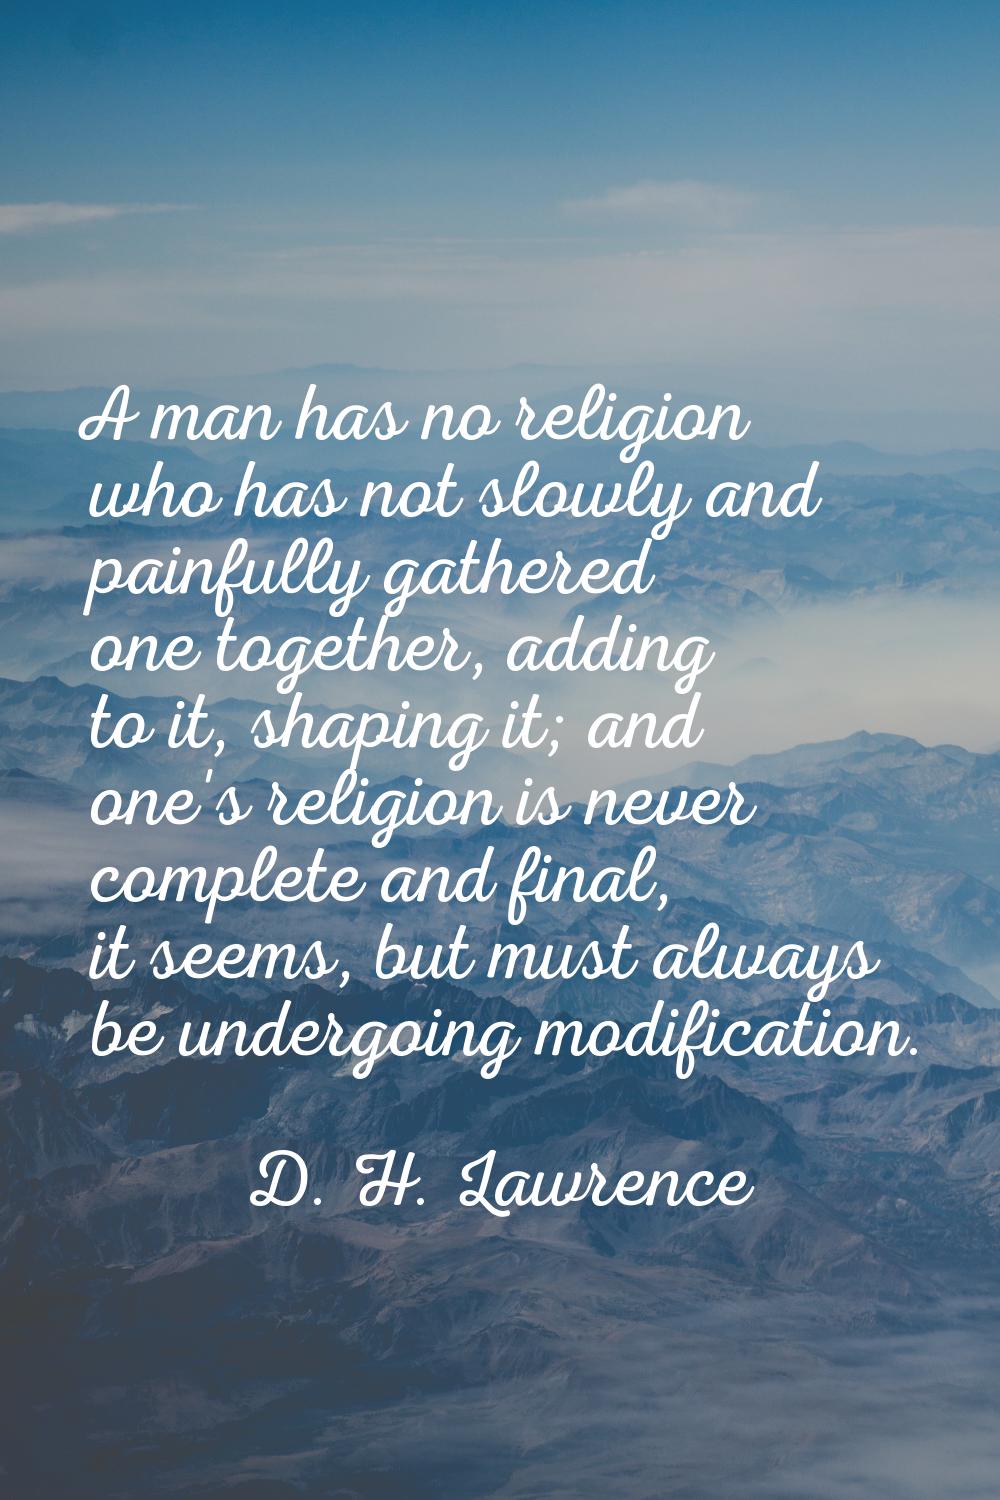 A man has no religion who has not slowly and painfully gathered one together, adding to it, shaping